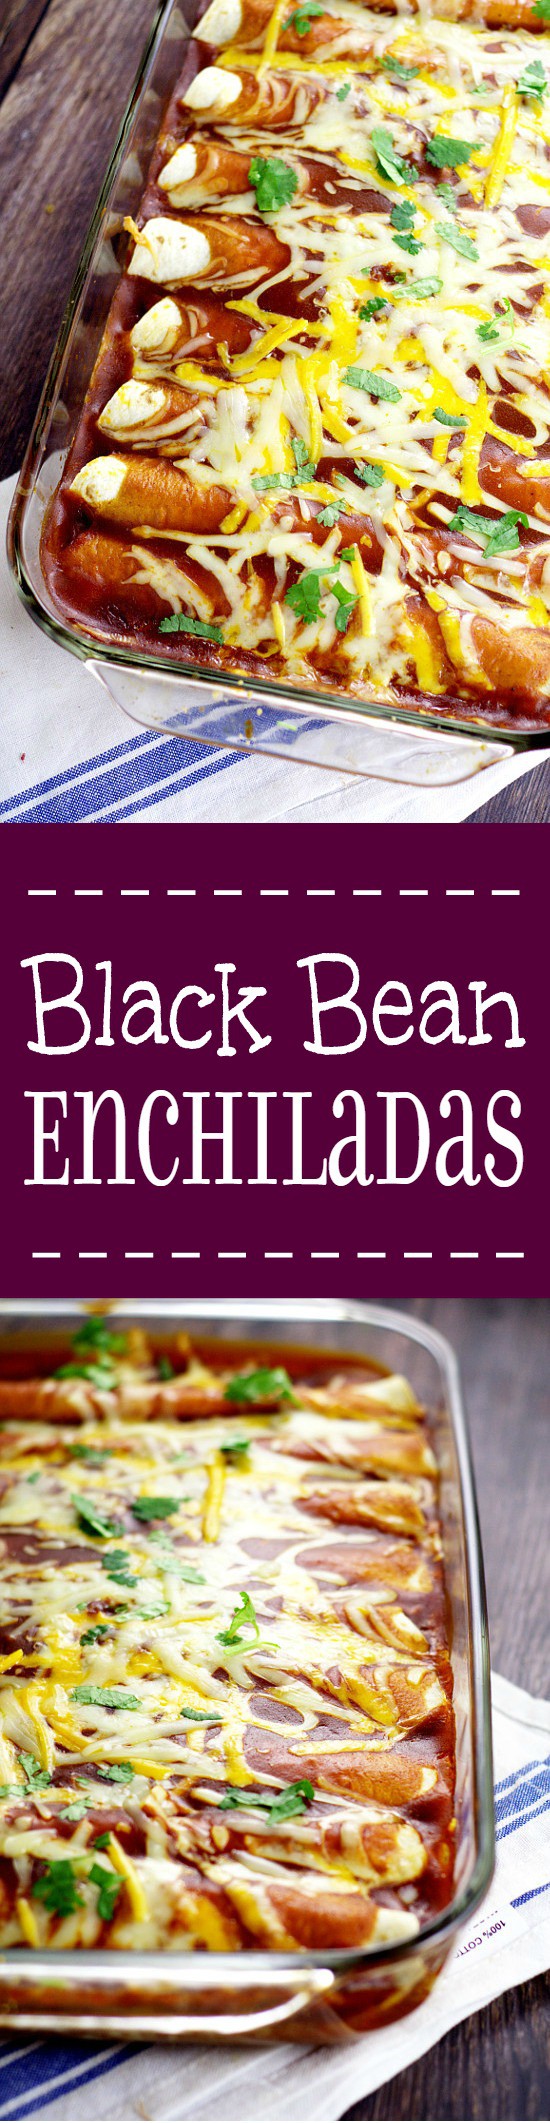 Black Bean Enchiladas. Simple and classic flavors are used for these Black Bean Enchiladas, that make a delicious, easy, and meatless family dinner.  Love the simple ingredients in this recipe!